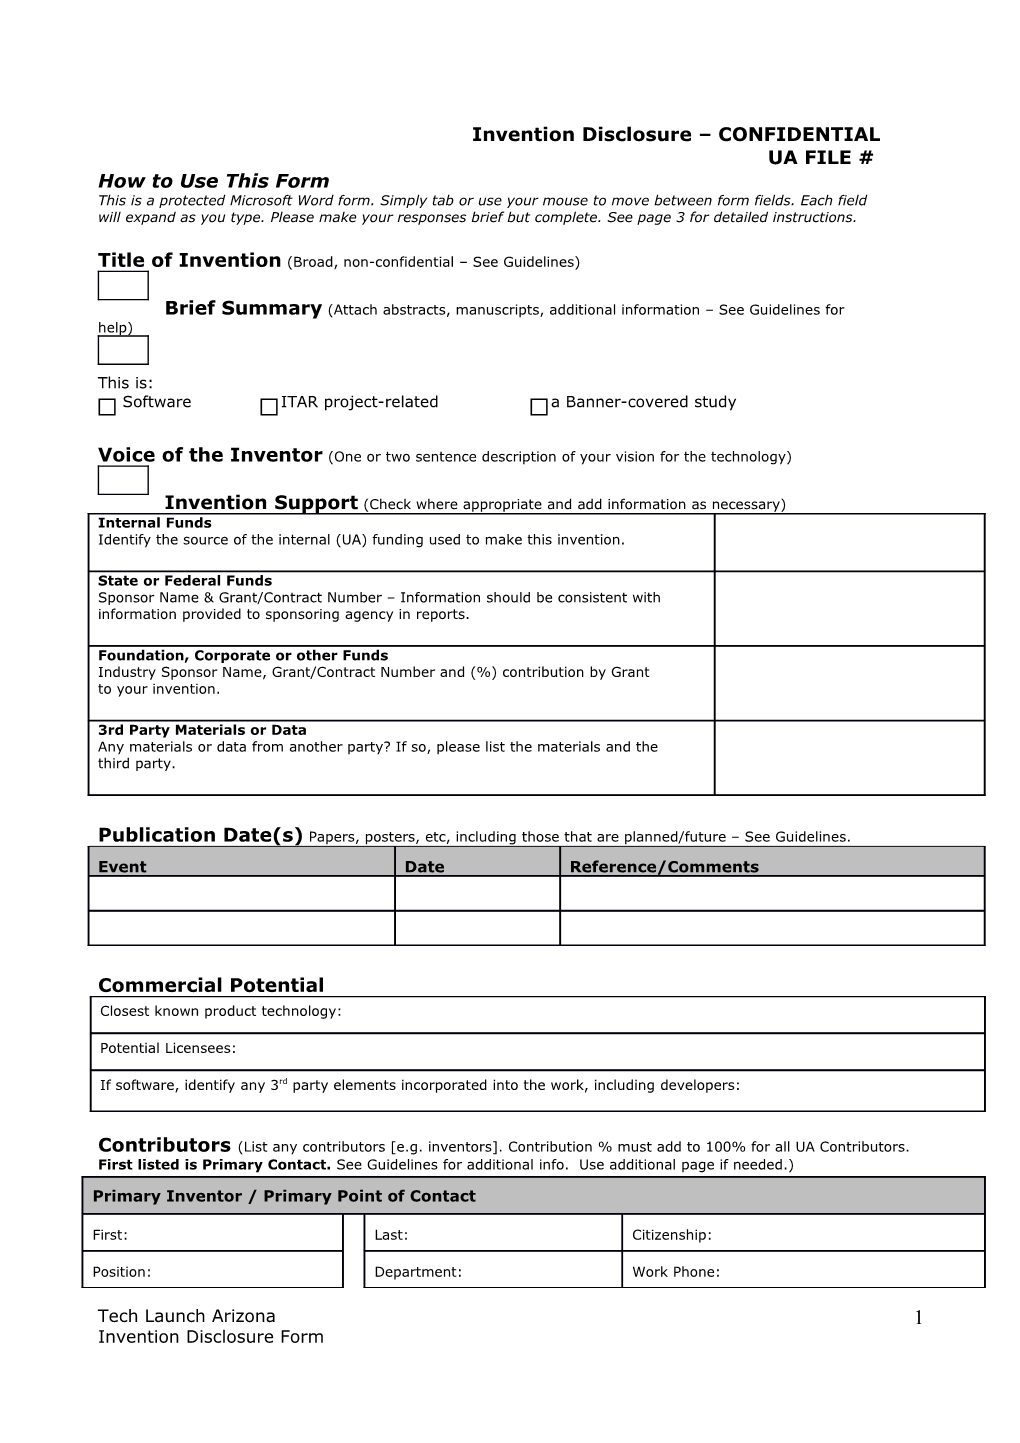 How to Use This Form